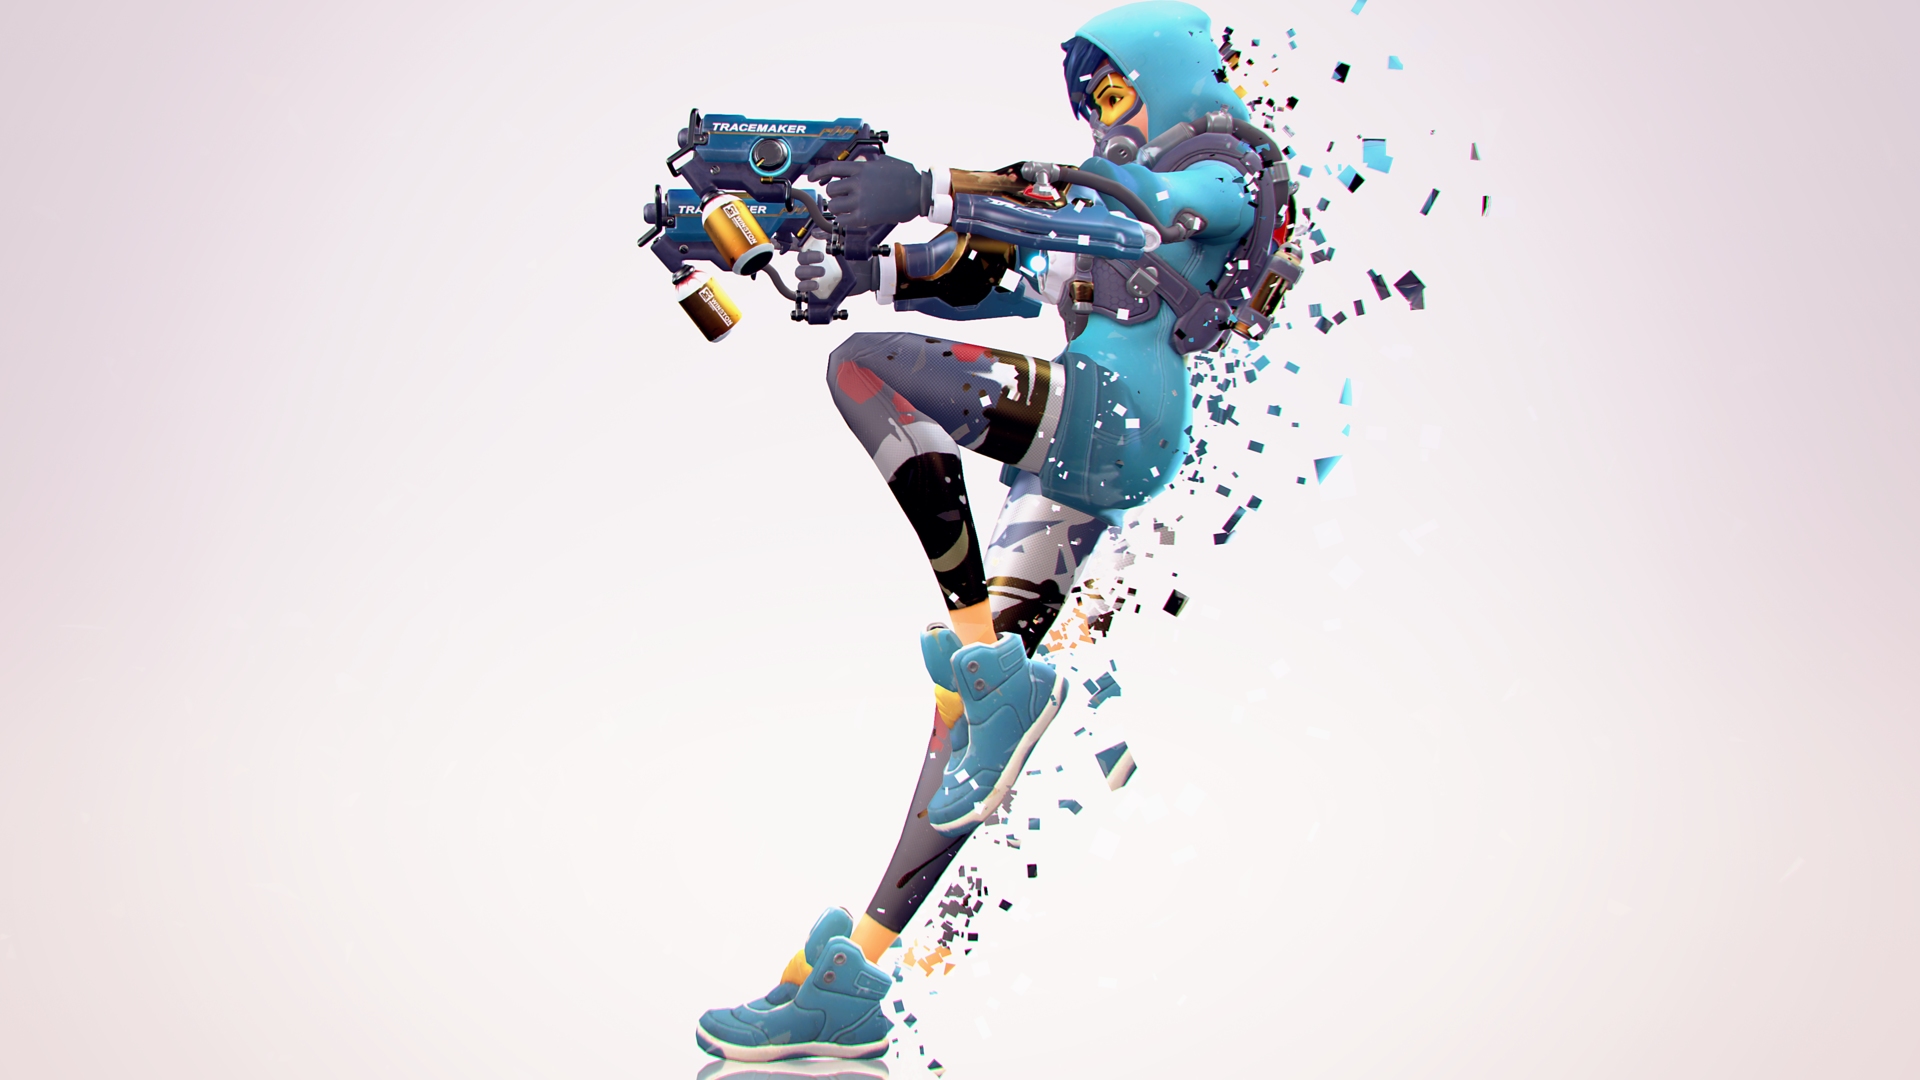 Overwatch, Video games, Tracer (Overwatch), White  background, Dispersion, Simple background, Digital art Wallpaper